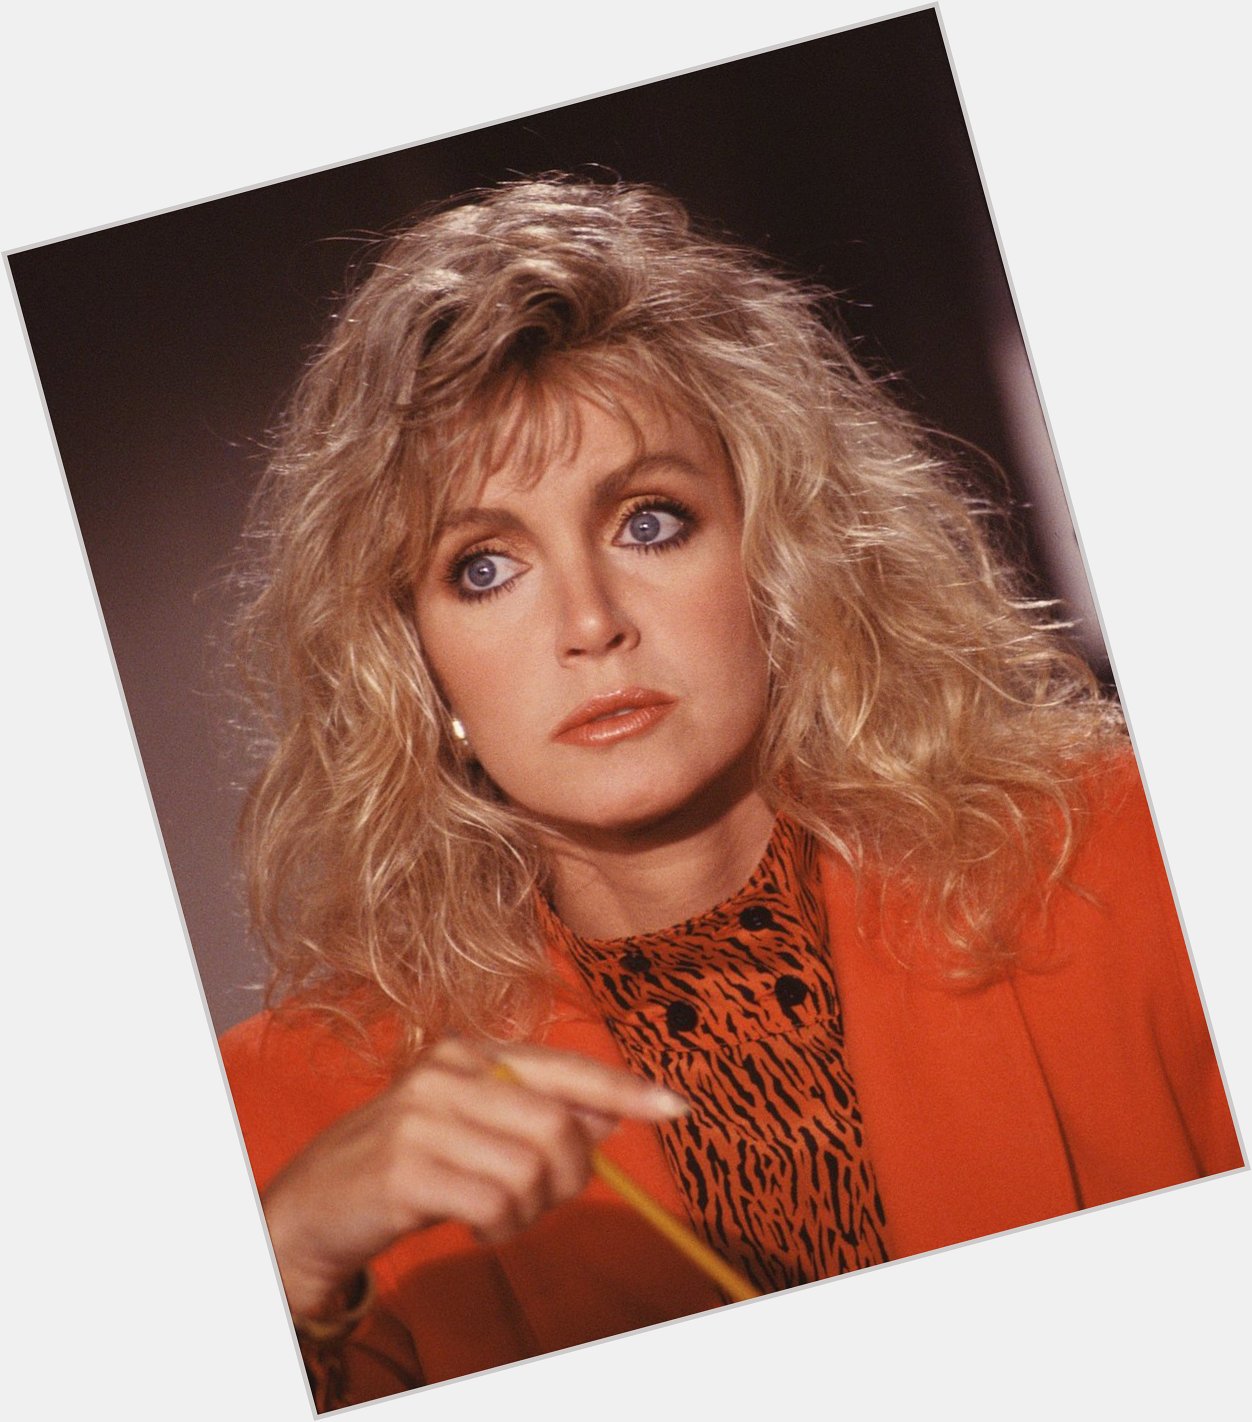 Wishing Donna Mills a happy 78th birthday! Watch her play Abby Ewing on Knots Landing . Do you miss the 